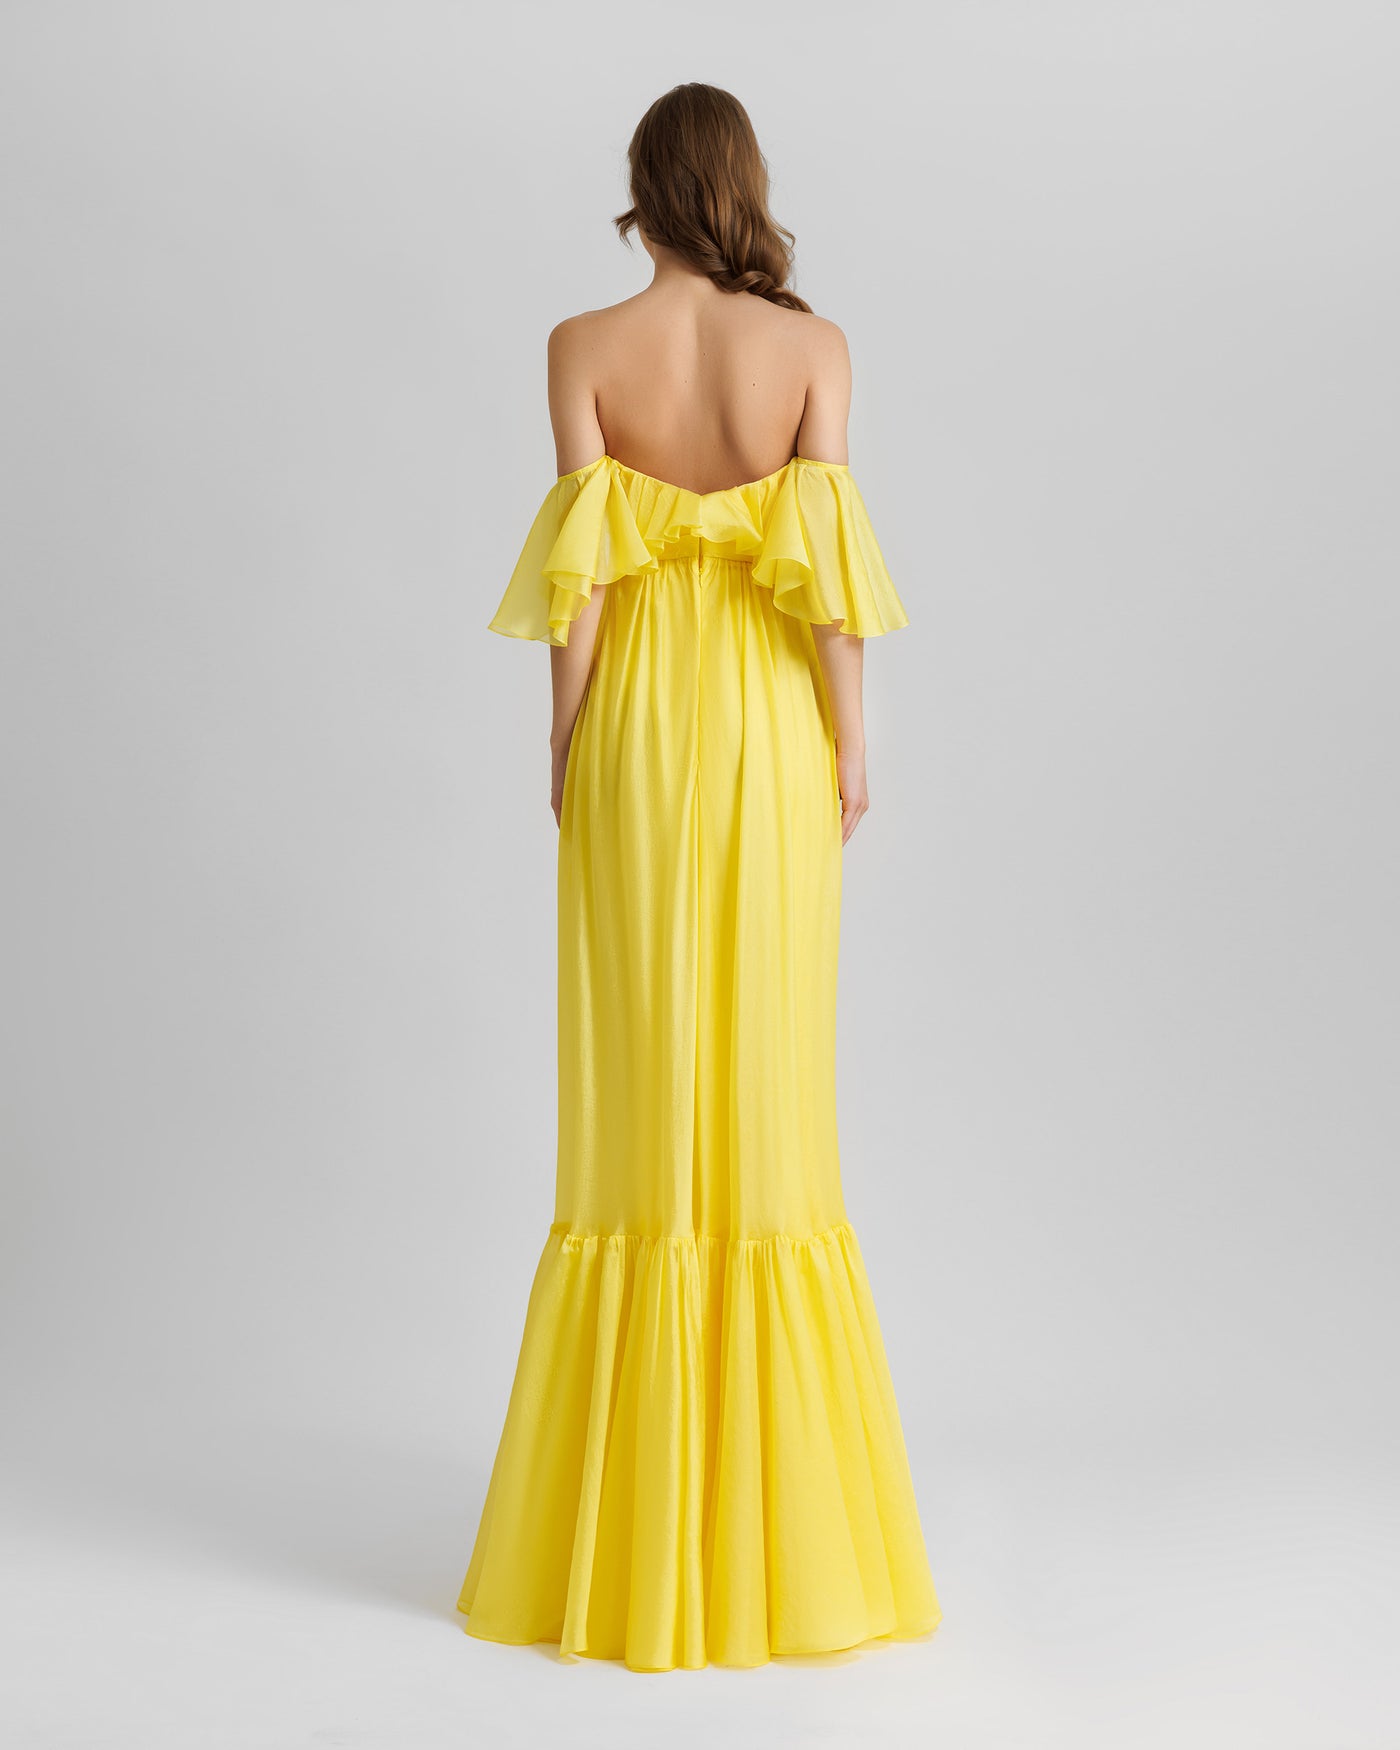 Yellow Off-The-Shoulders Flowy Dress